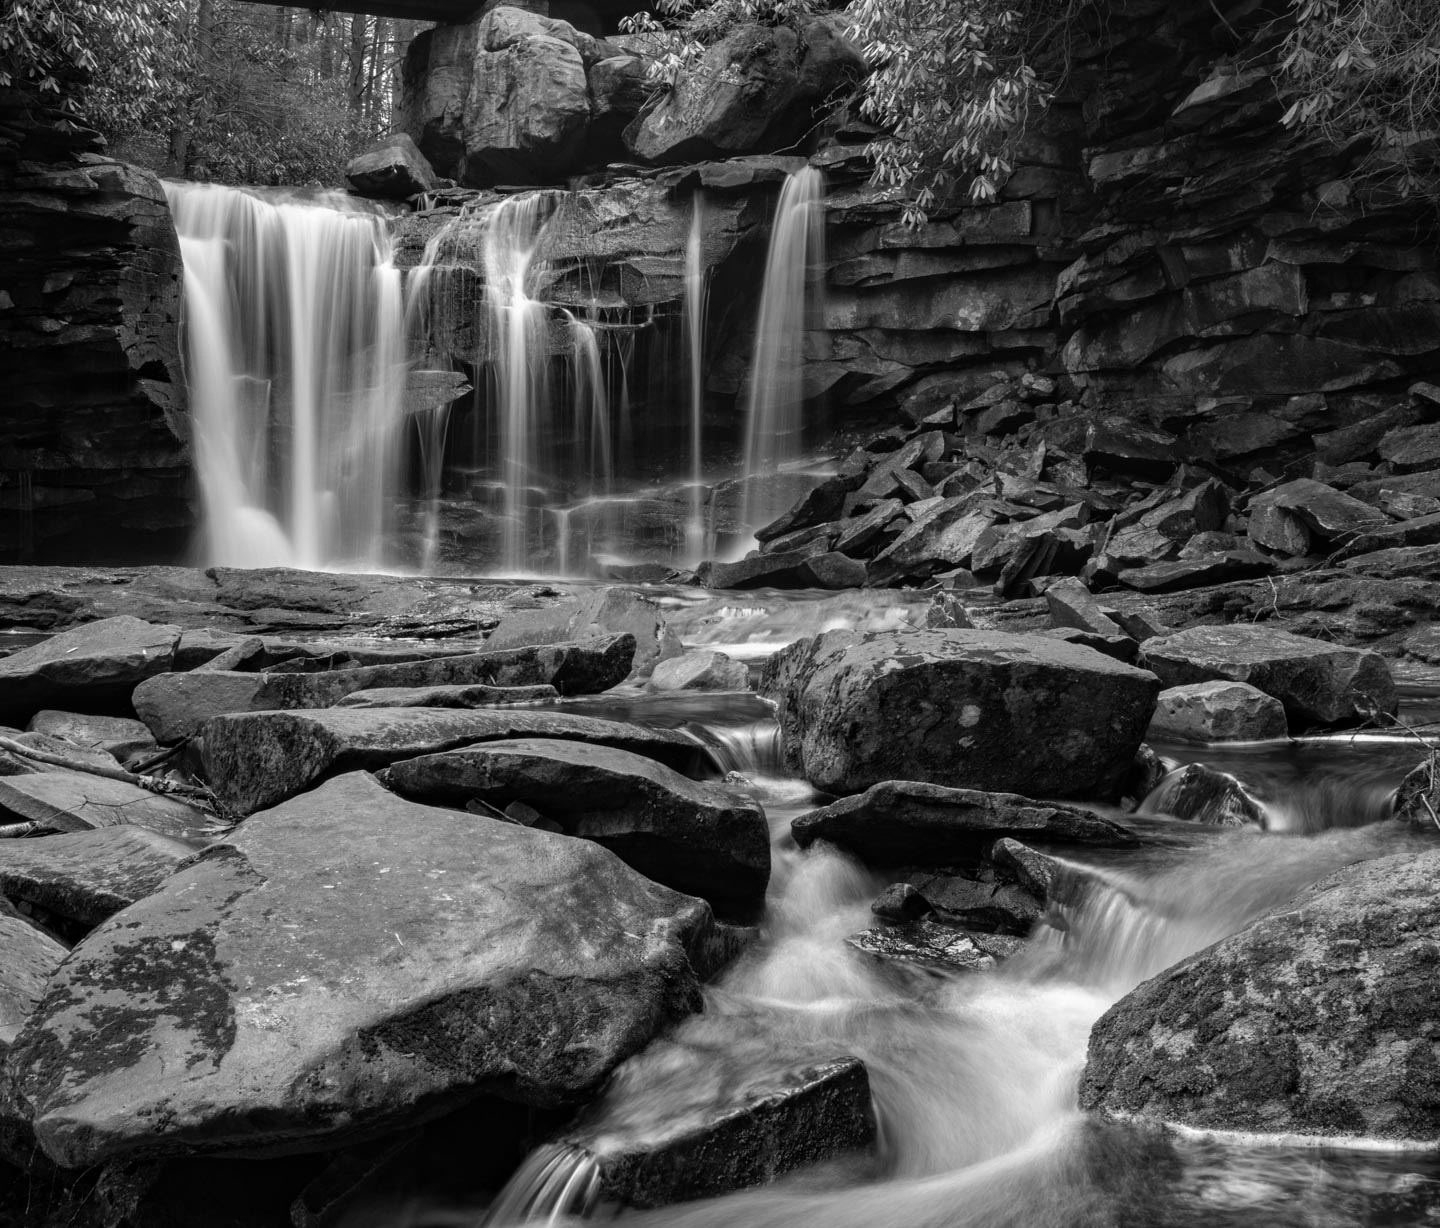 2nd PrizeOpen Mono In Class 3 By John Whitmore For Elakala Falls On A Rainy Day In BW APR-2022.jpg